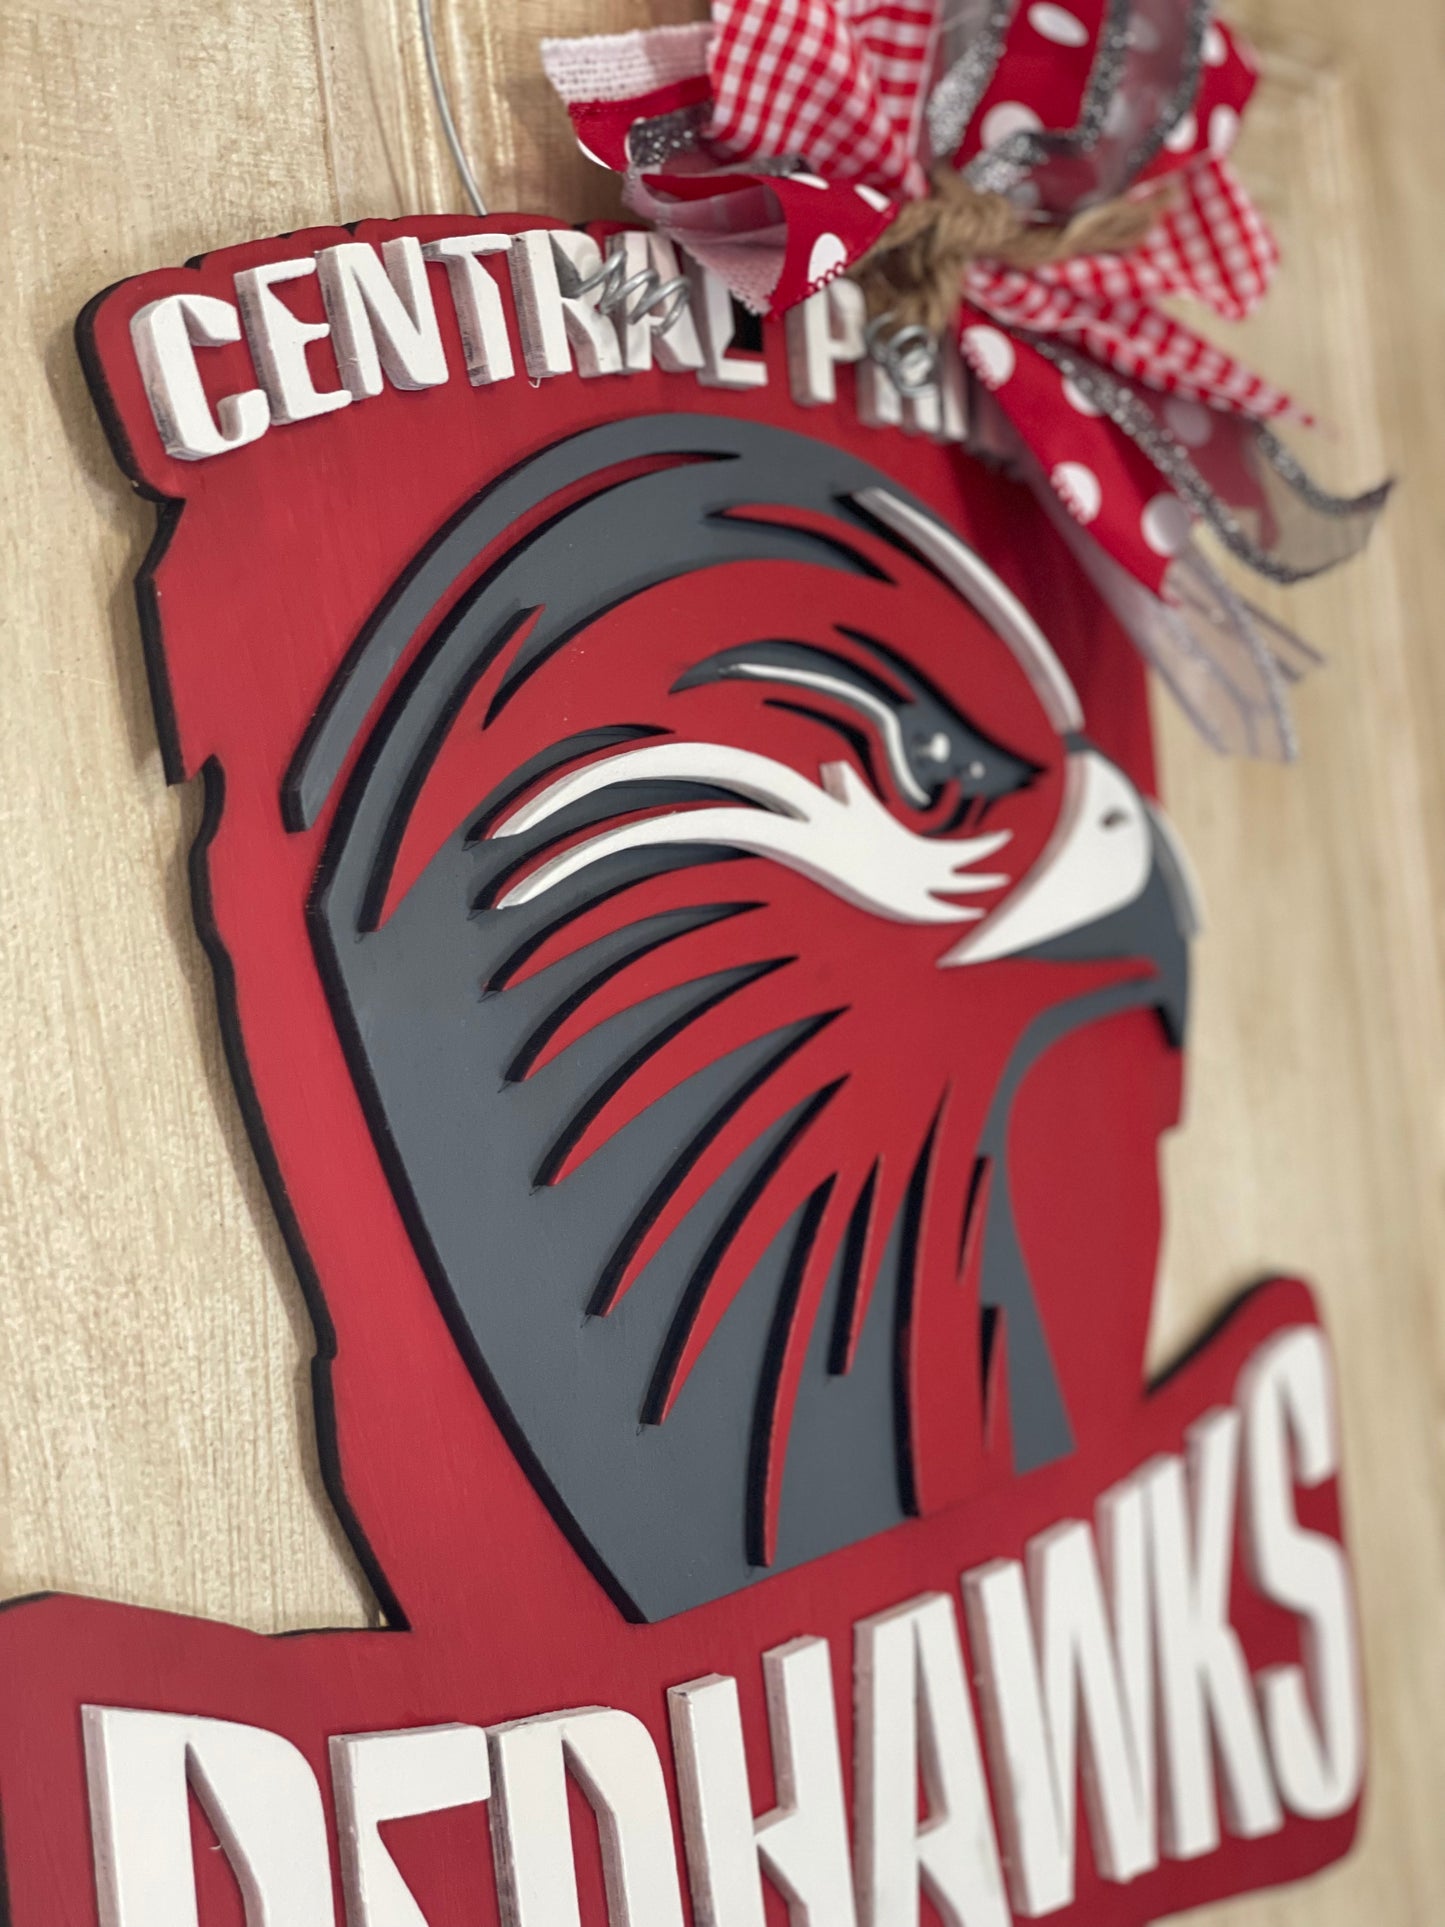 3D Central Private RedHawks door sign